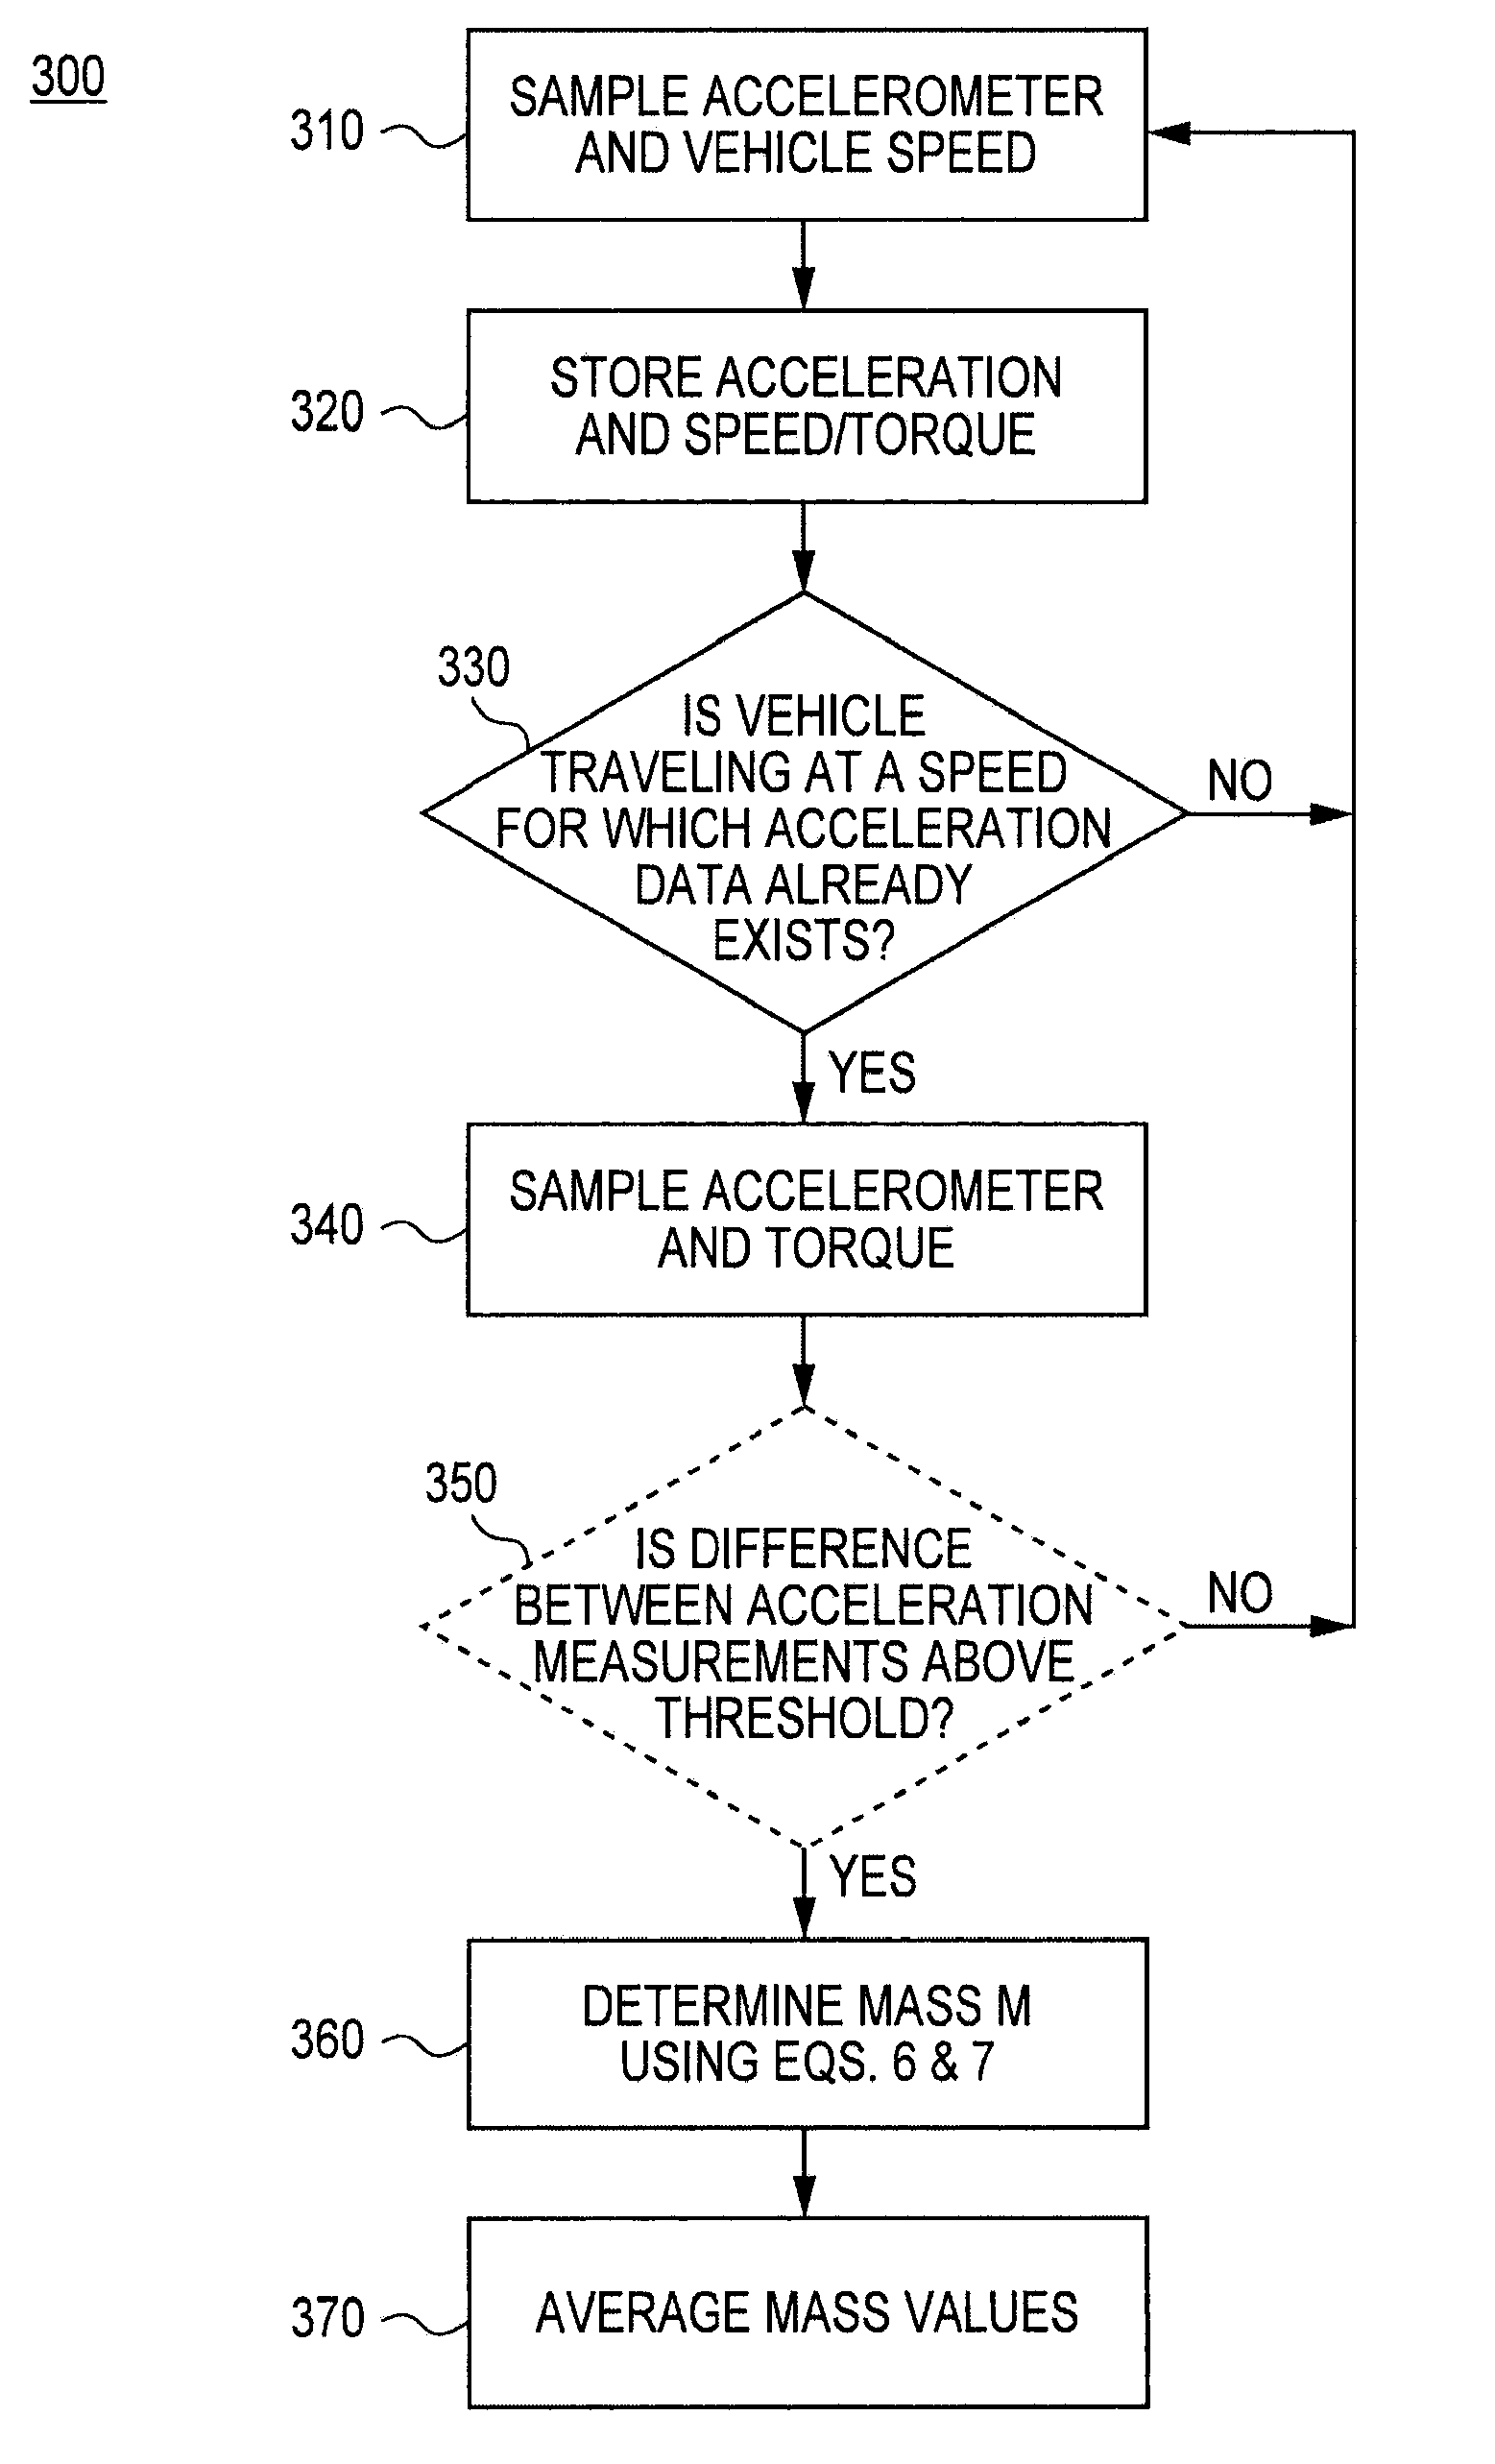 Mass, drag coefficient and inclination determination using accelerometer sensor